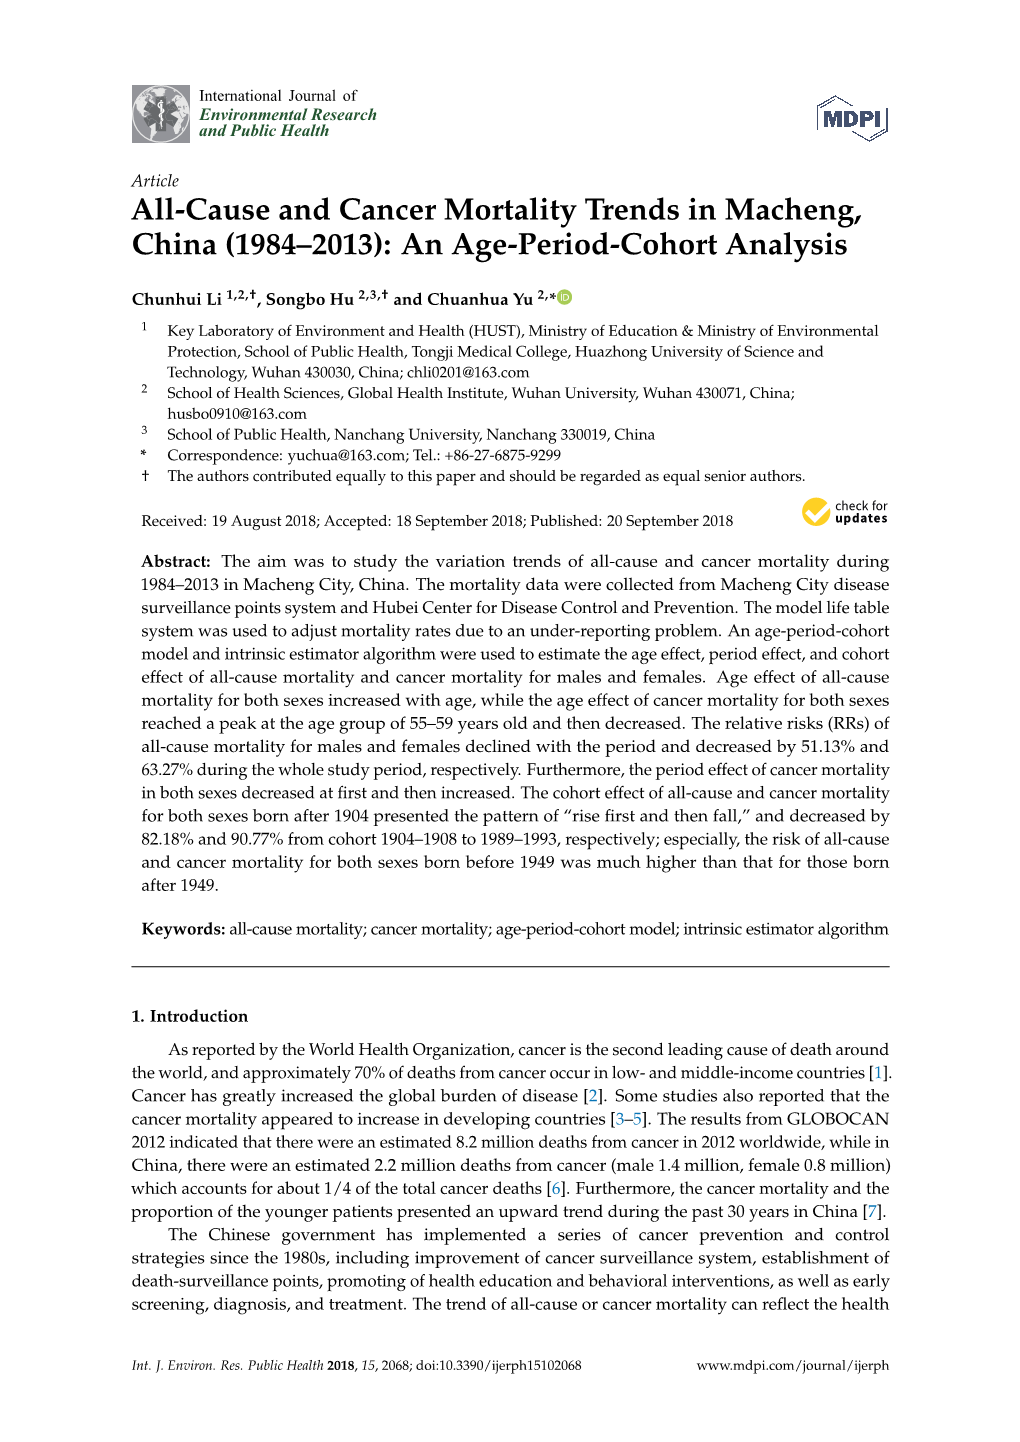 All-Cause and Cancer Mortality Trends in Macheng, China (1984–2013): an Age-Period-Cohort Analysis